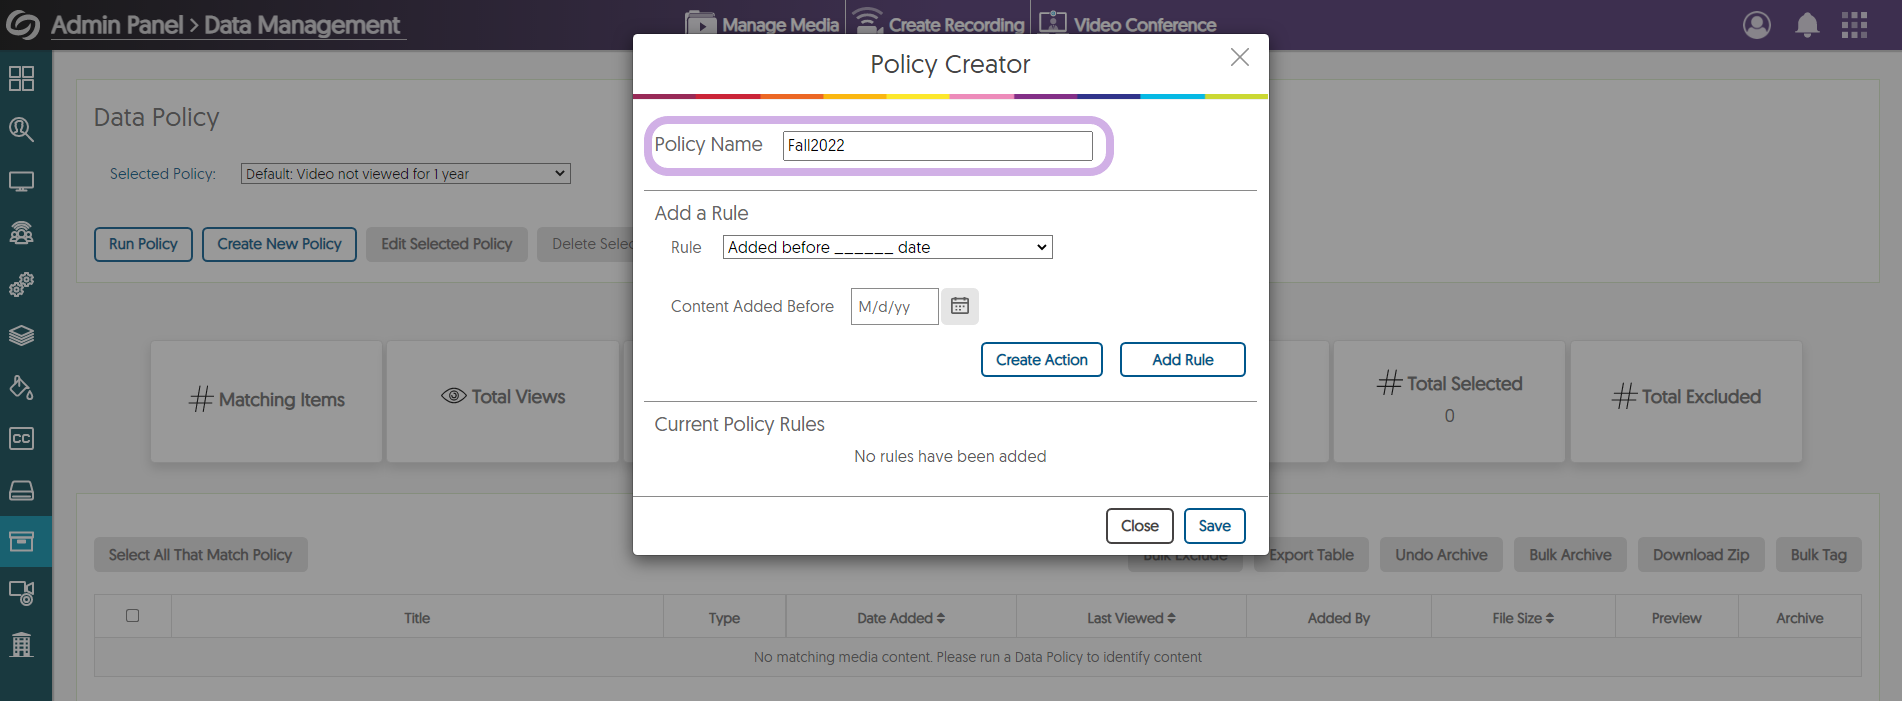 Policy Creator window with Policy Name highlighted.